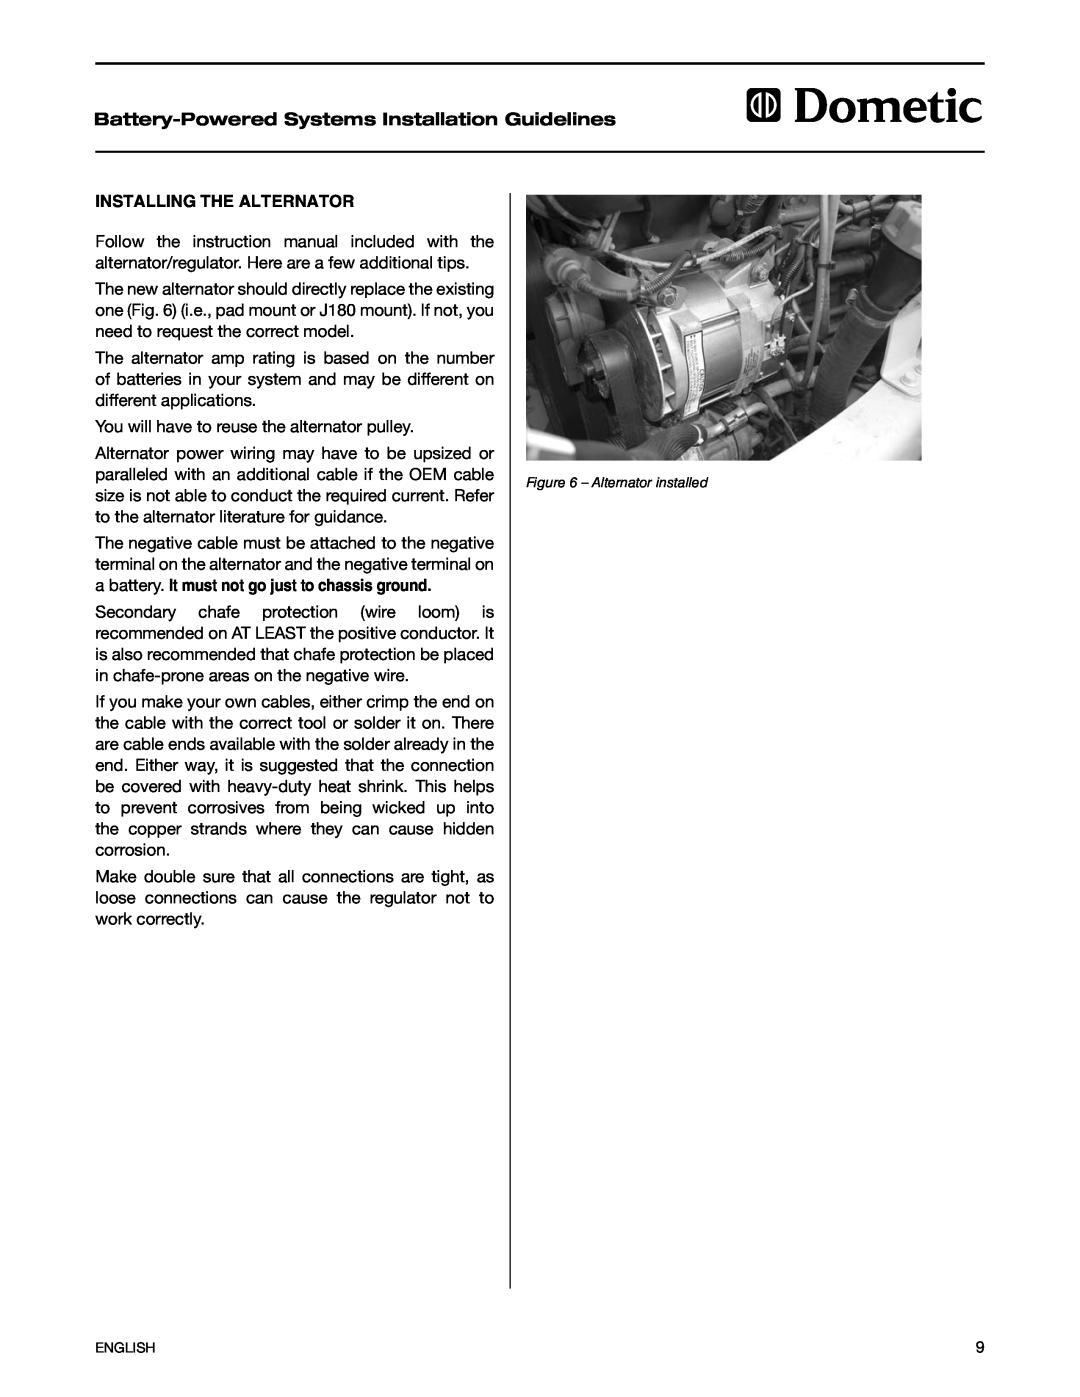 Dometic 2597 manual Installing the Alternator, Battery-PoweredSystems Installation Guidelines 